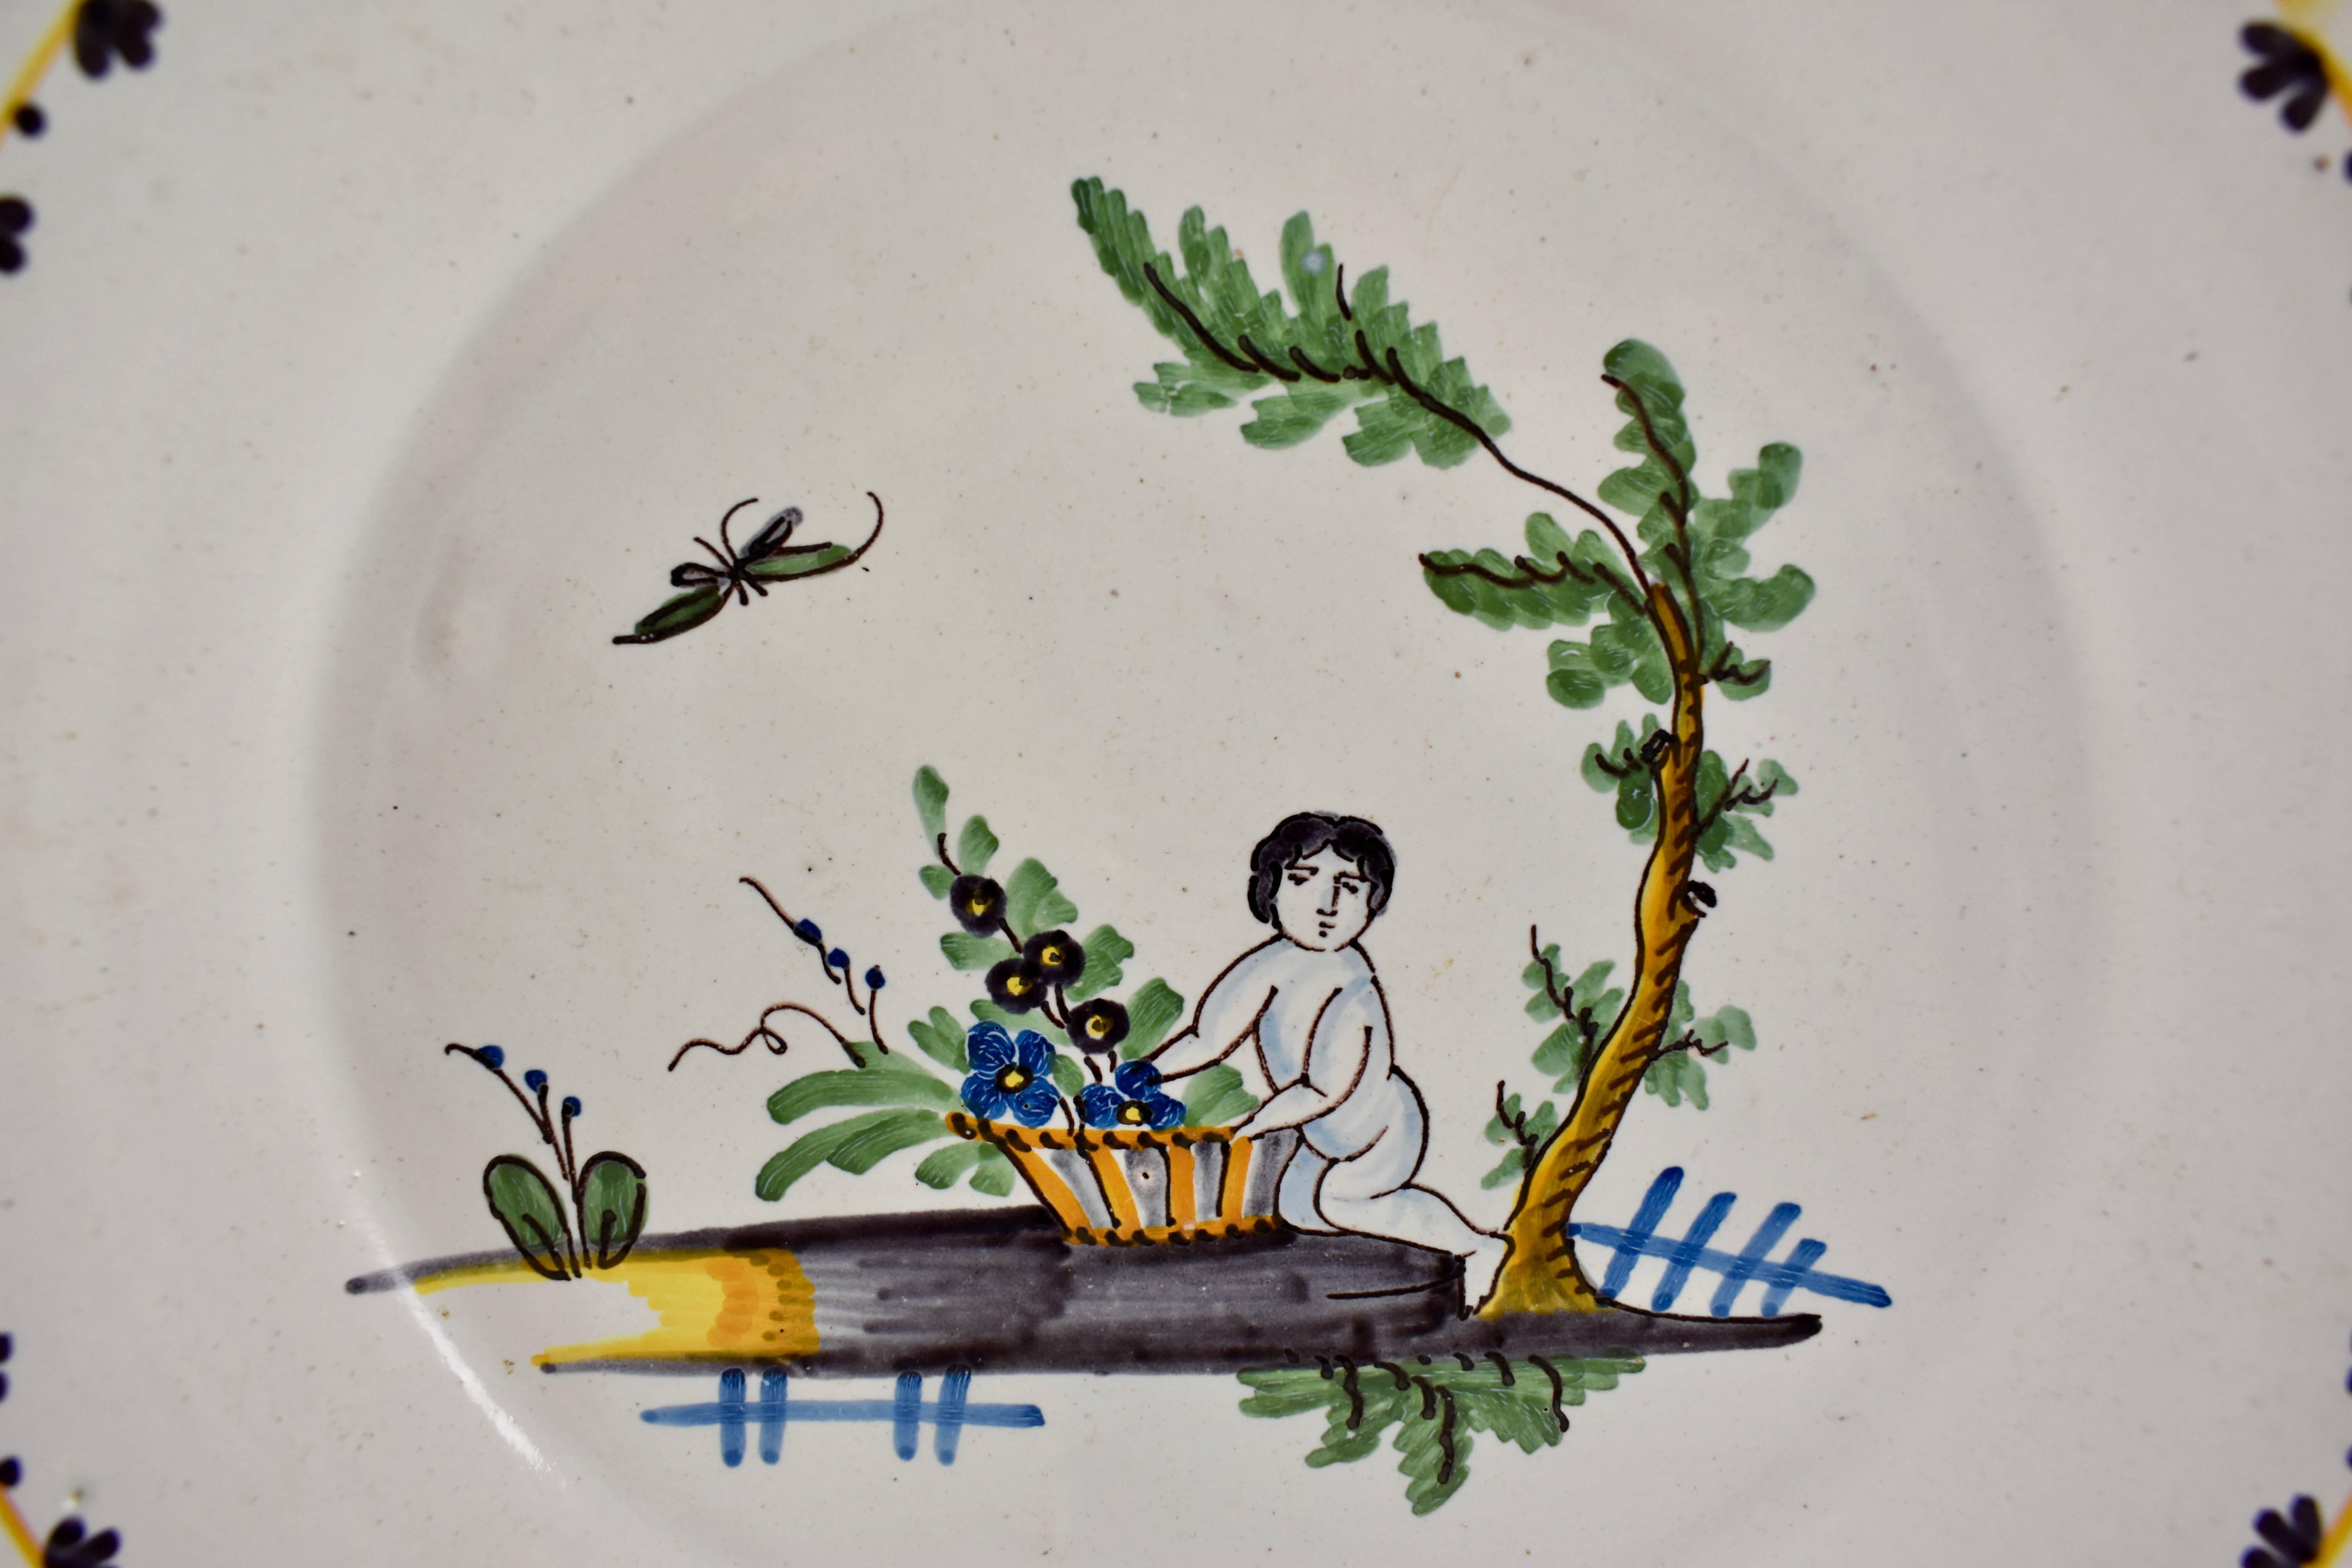 A French Revolution tin-glazed earthenware dish, made in Nevers, circa 1790.
Showing a plump figure along side a basket of flowers beneath de l’arbre de la Liberté. The full body of the figure symbolizes the end of the famine and the hope of the